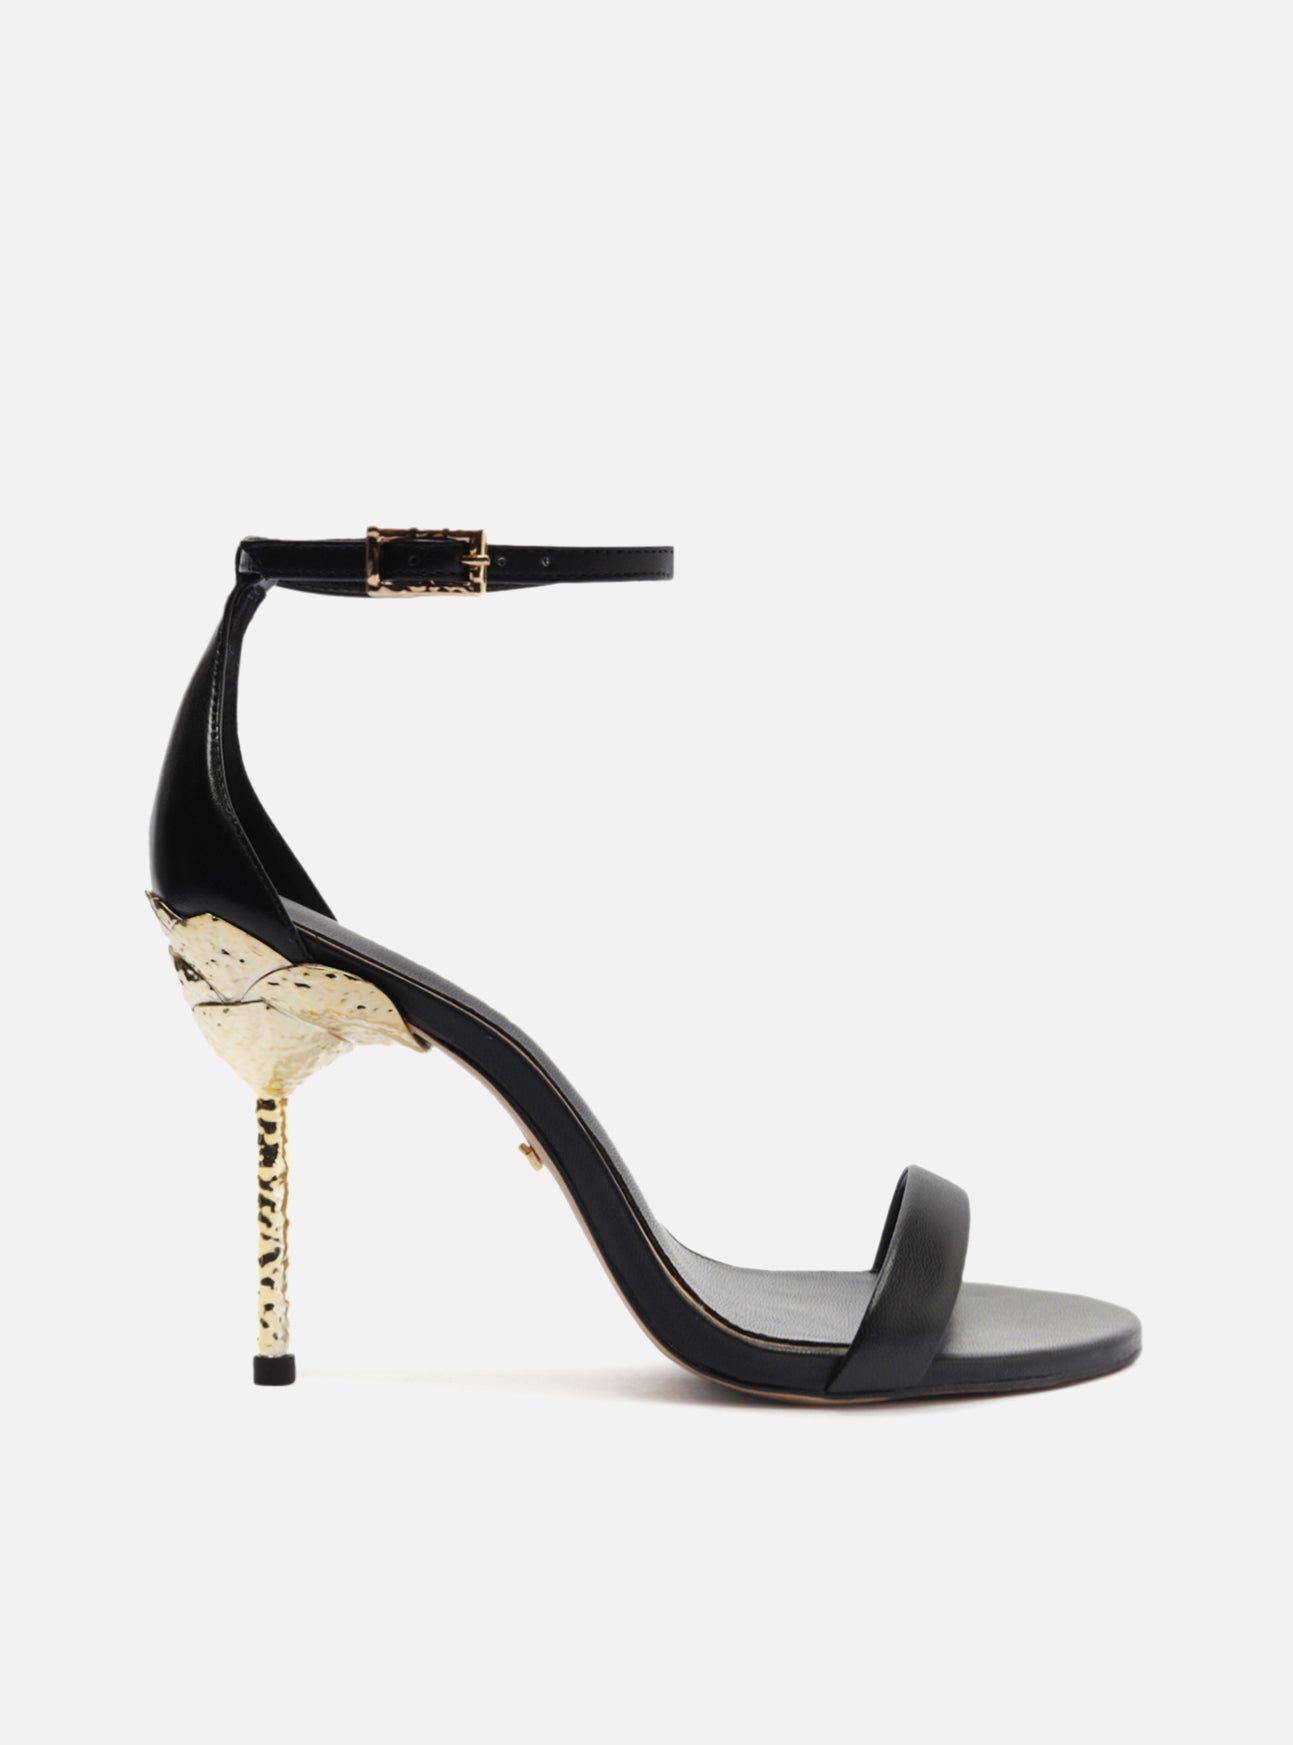 Black leather sandal with a high stiletto heel in hammered gold metal and a rounded toe. Closed heel and ankle strap.